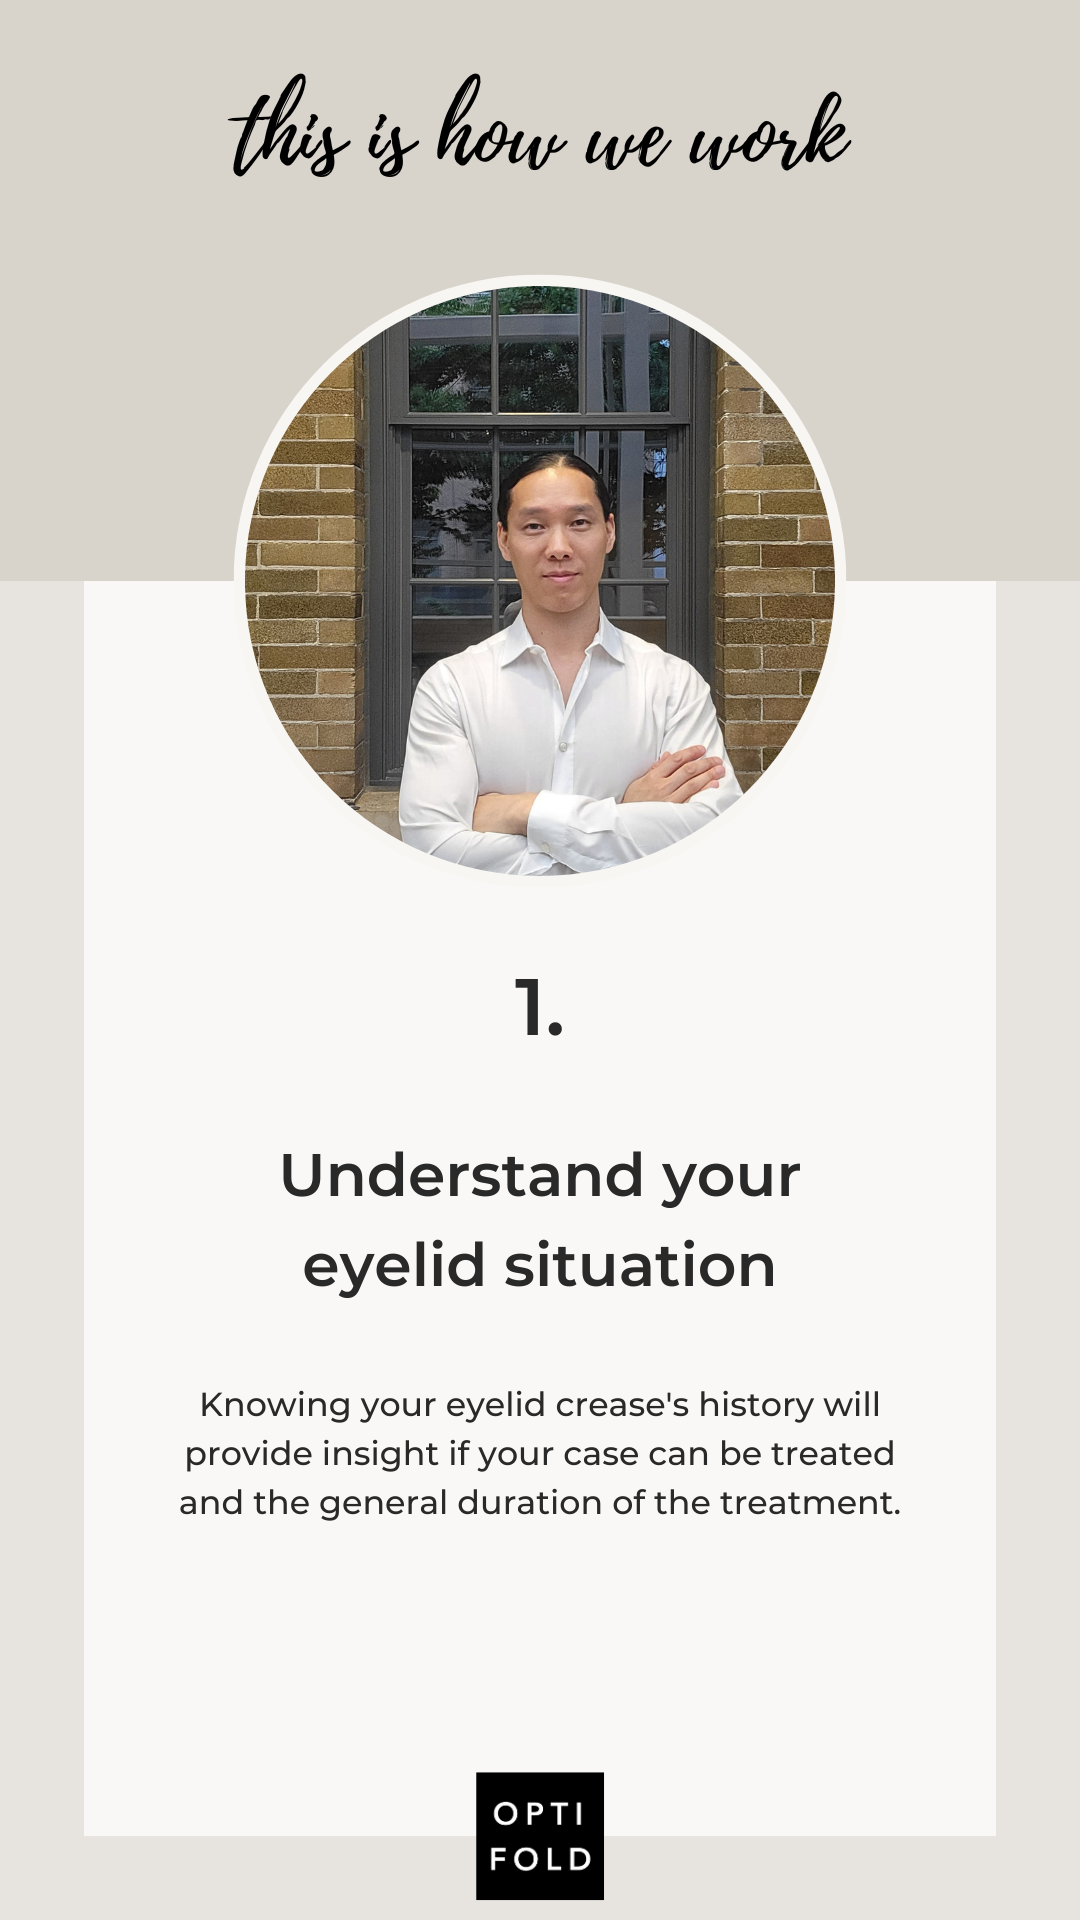 Knowing your eyelid crease's history will provide insight if your case can be treated and the general duration of the treatment.